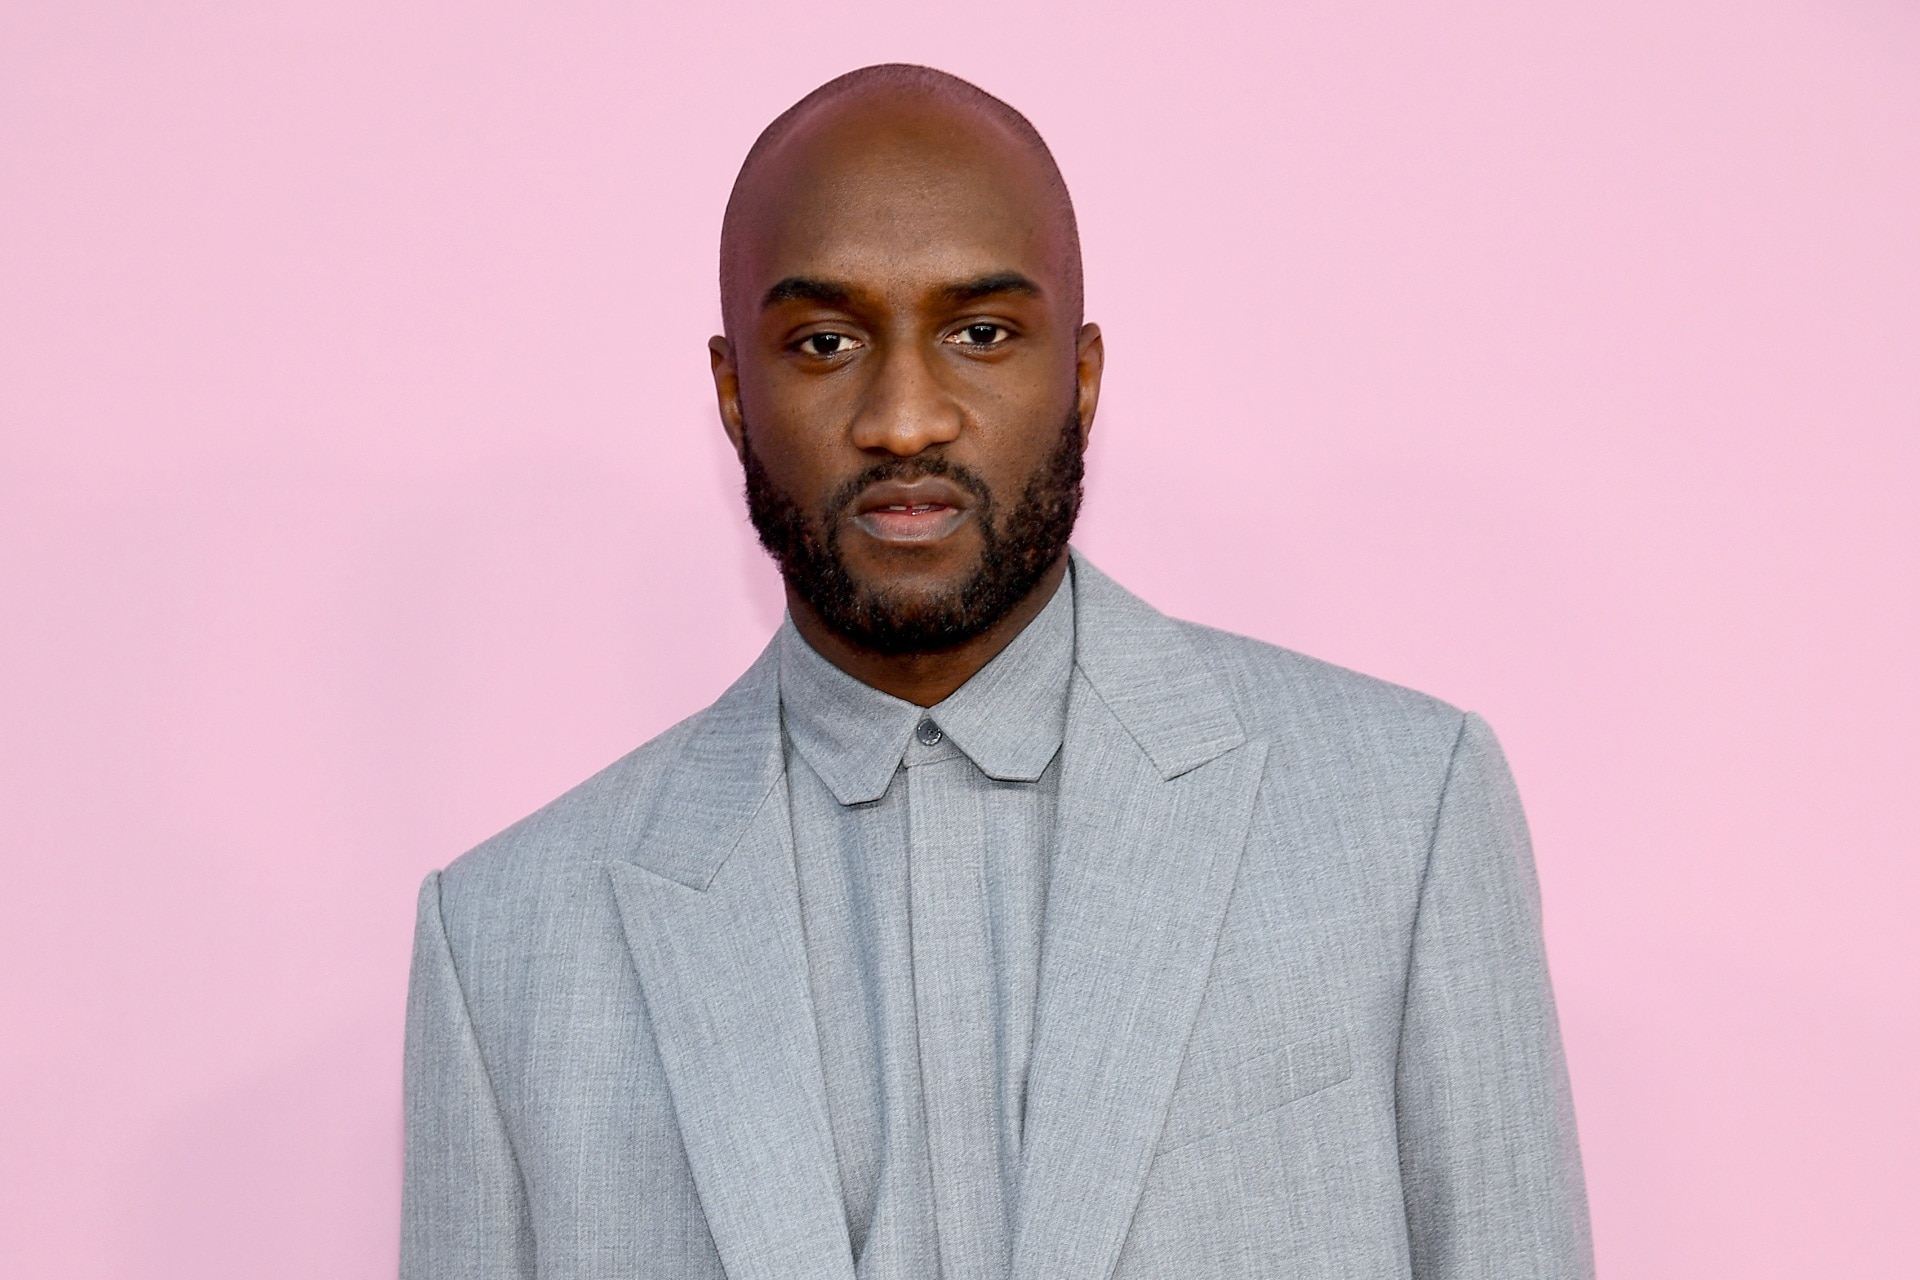 REMEMBERING VIRGIL ABLOH: A VISIONARY DESIGNER AND CULTURE PIONEER